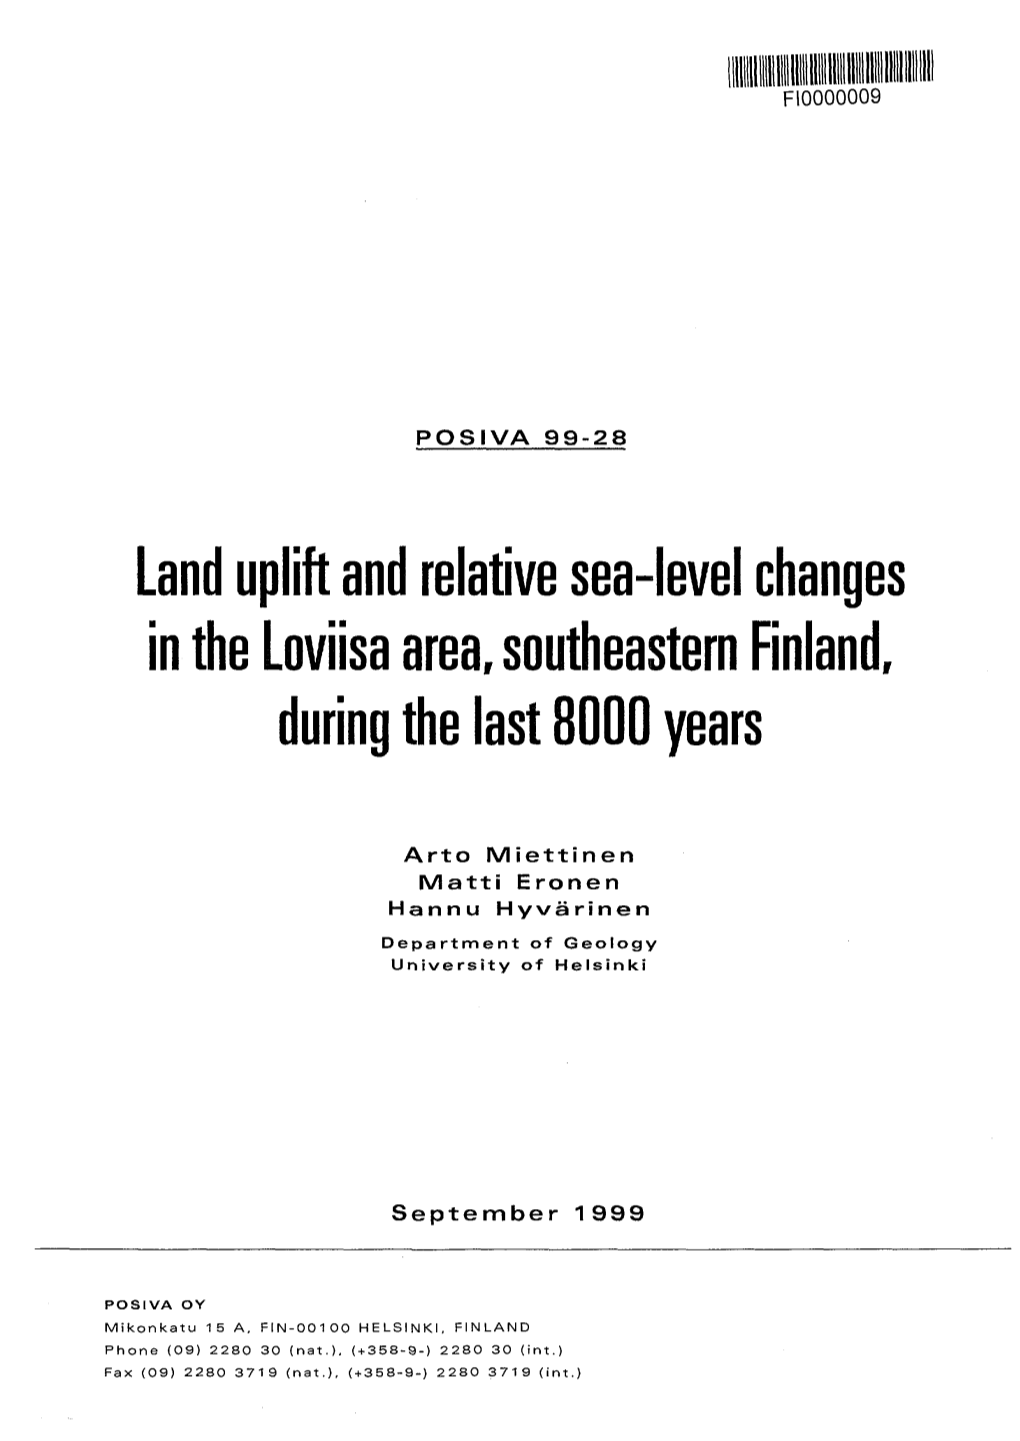 Land Uplift and Relative Sea-Level Changes in the Loviisa Area, Southeastern Finland, During the Last 8000 Years